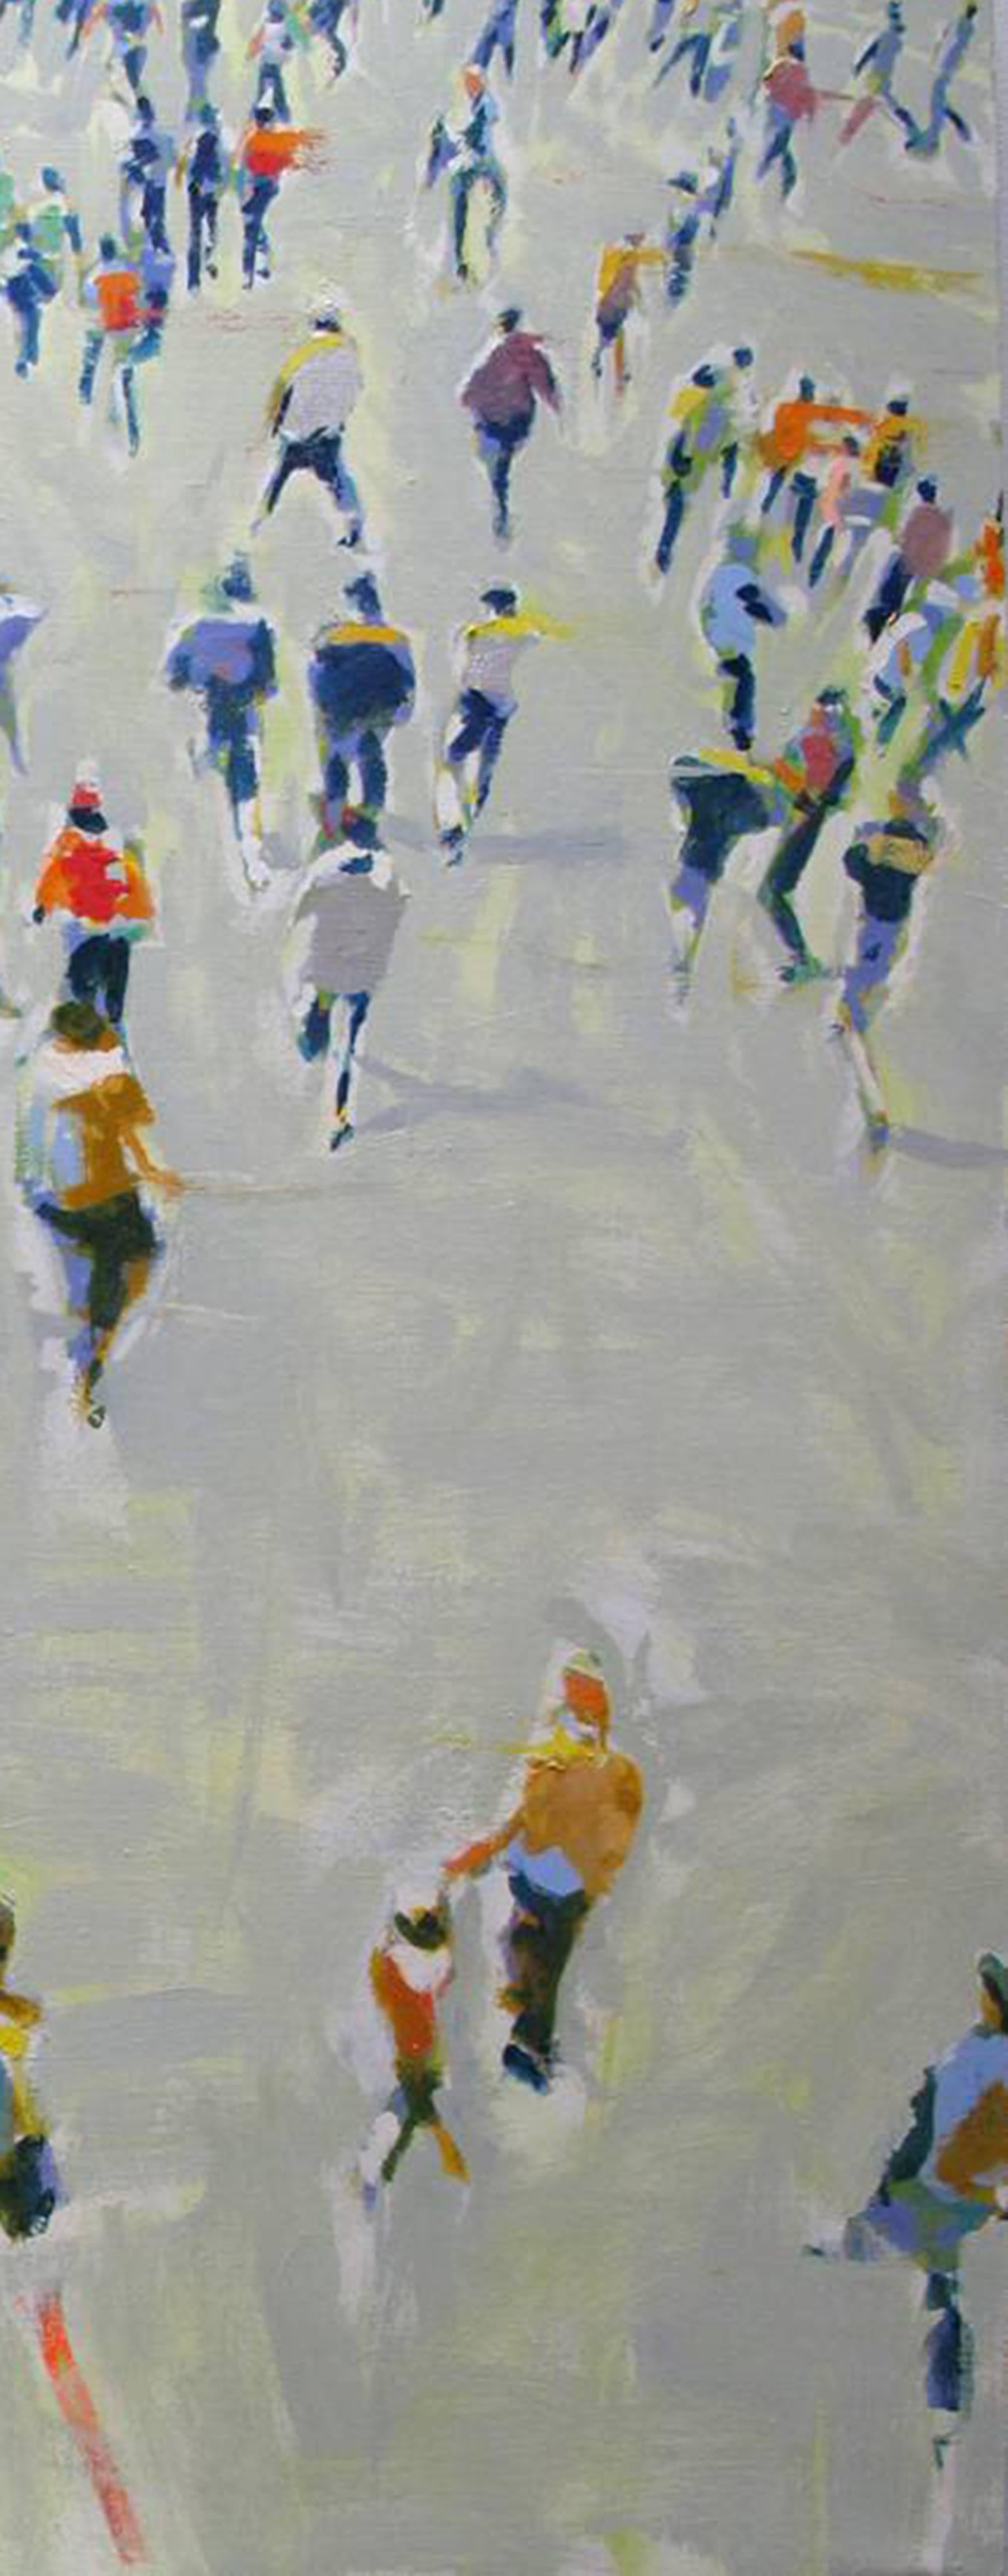 Ticket Lines - Gray Figurative Painting by David Kapp